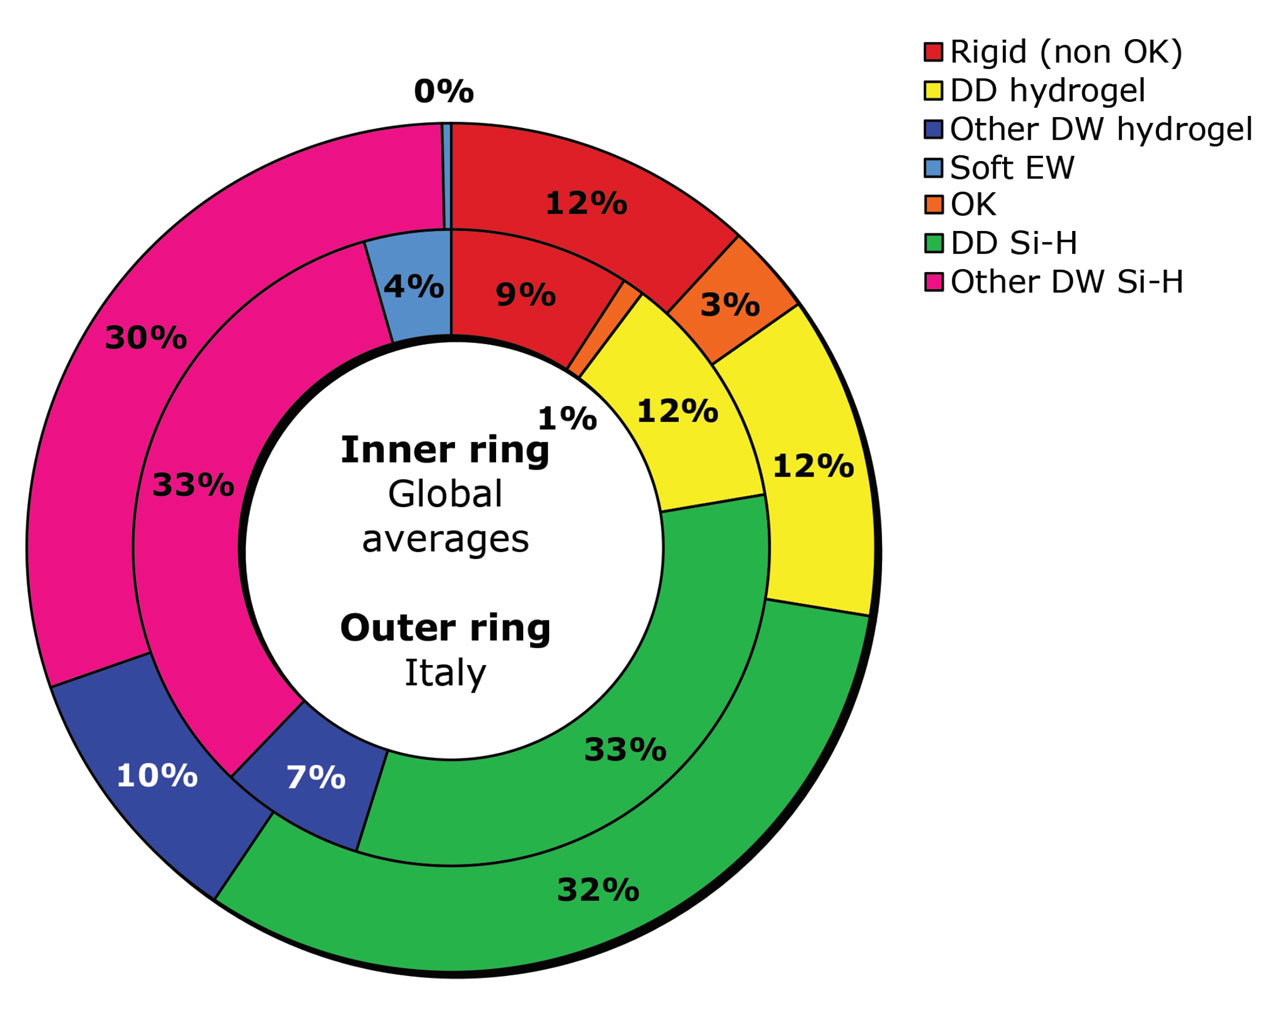 FIGURE 2. Lens prescribing for seven major categories of contact lenses for Italy (outer ring) versus the global average (inner ring).